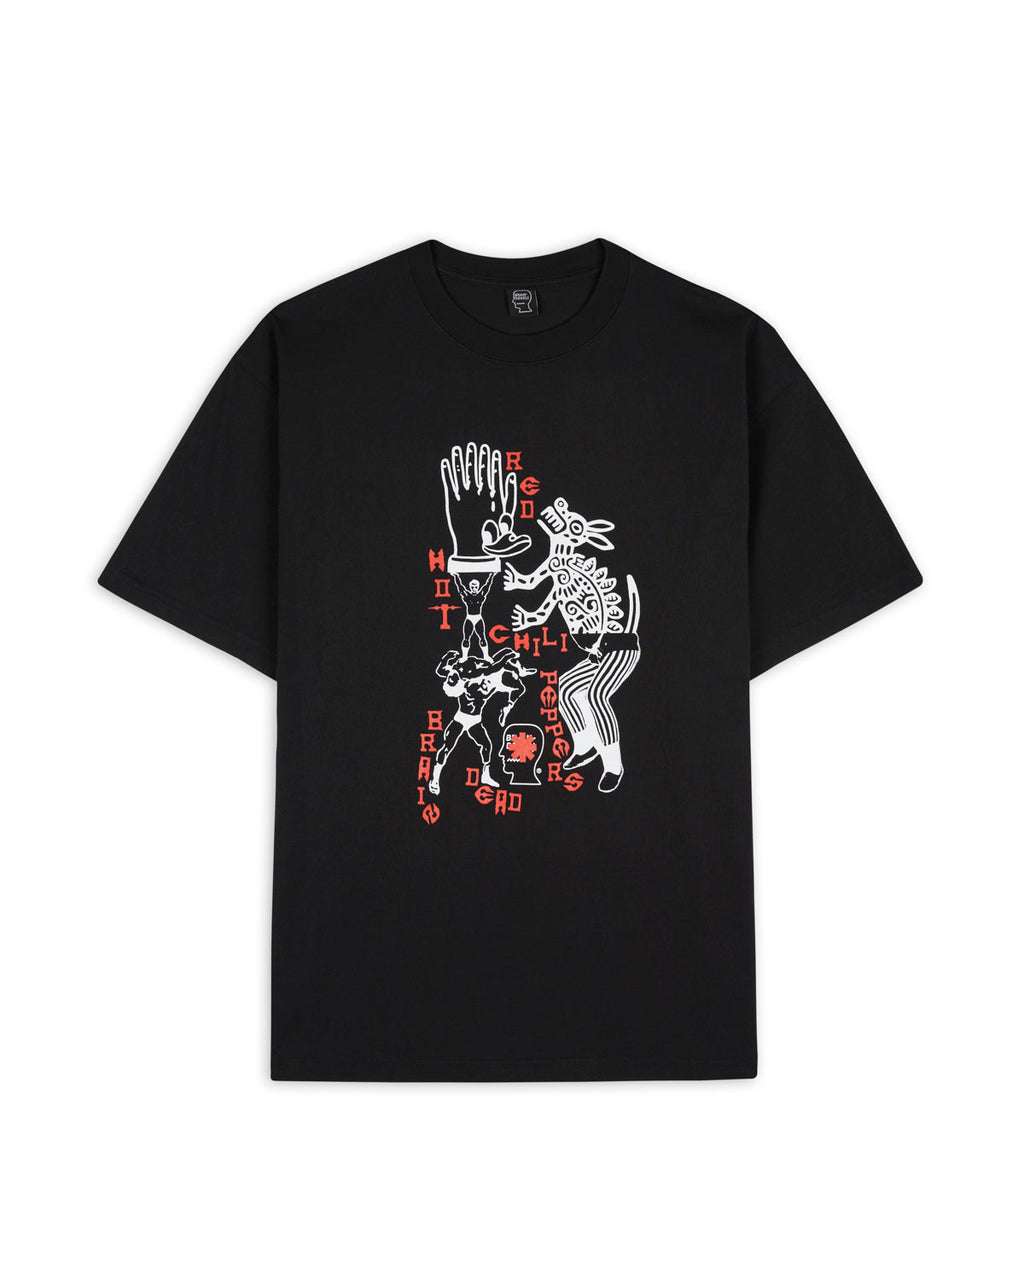 Brain Dead x Red Hot Chili Peppers Dog Dance T-Shirt - Black